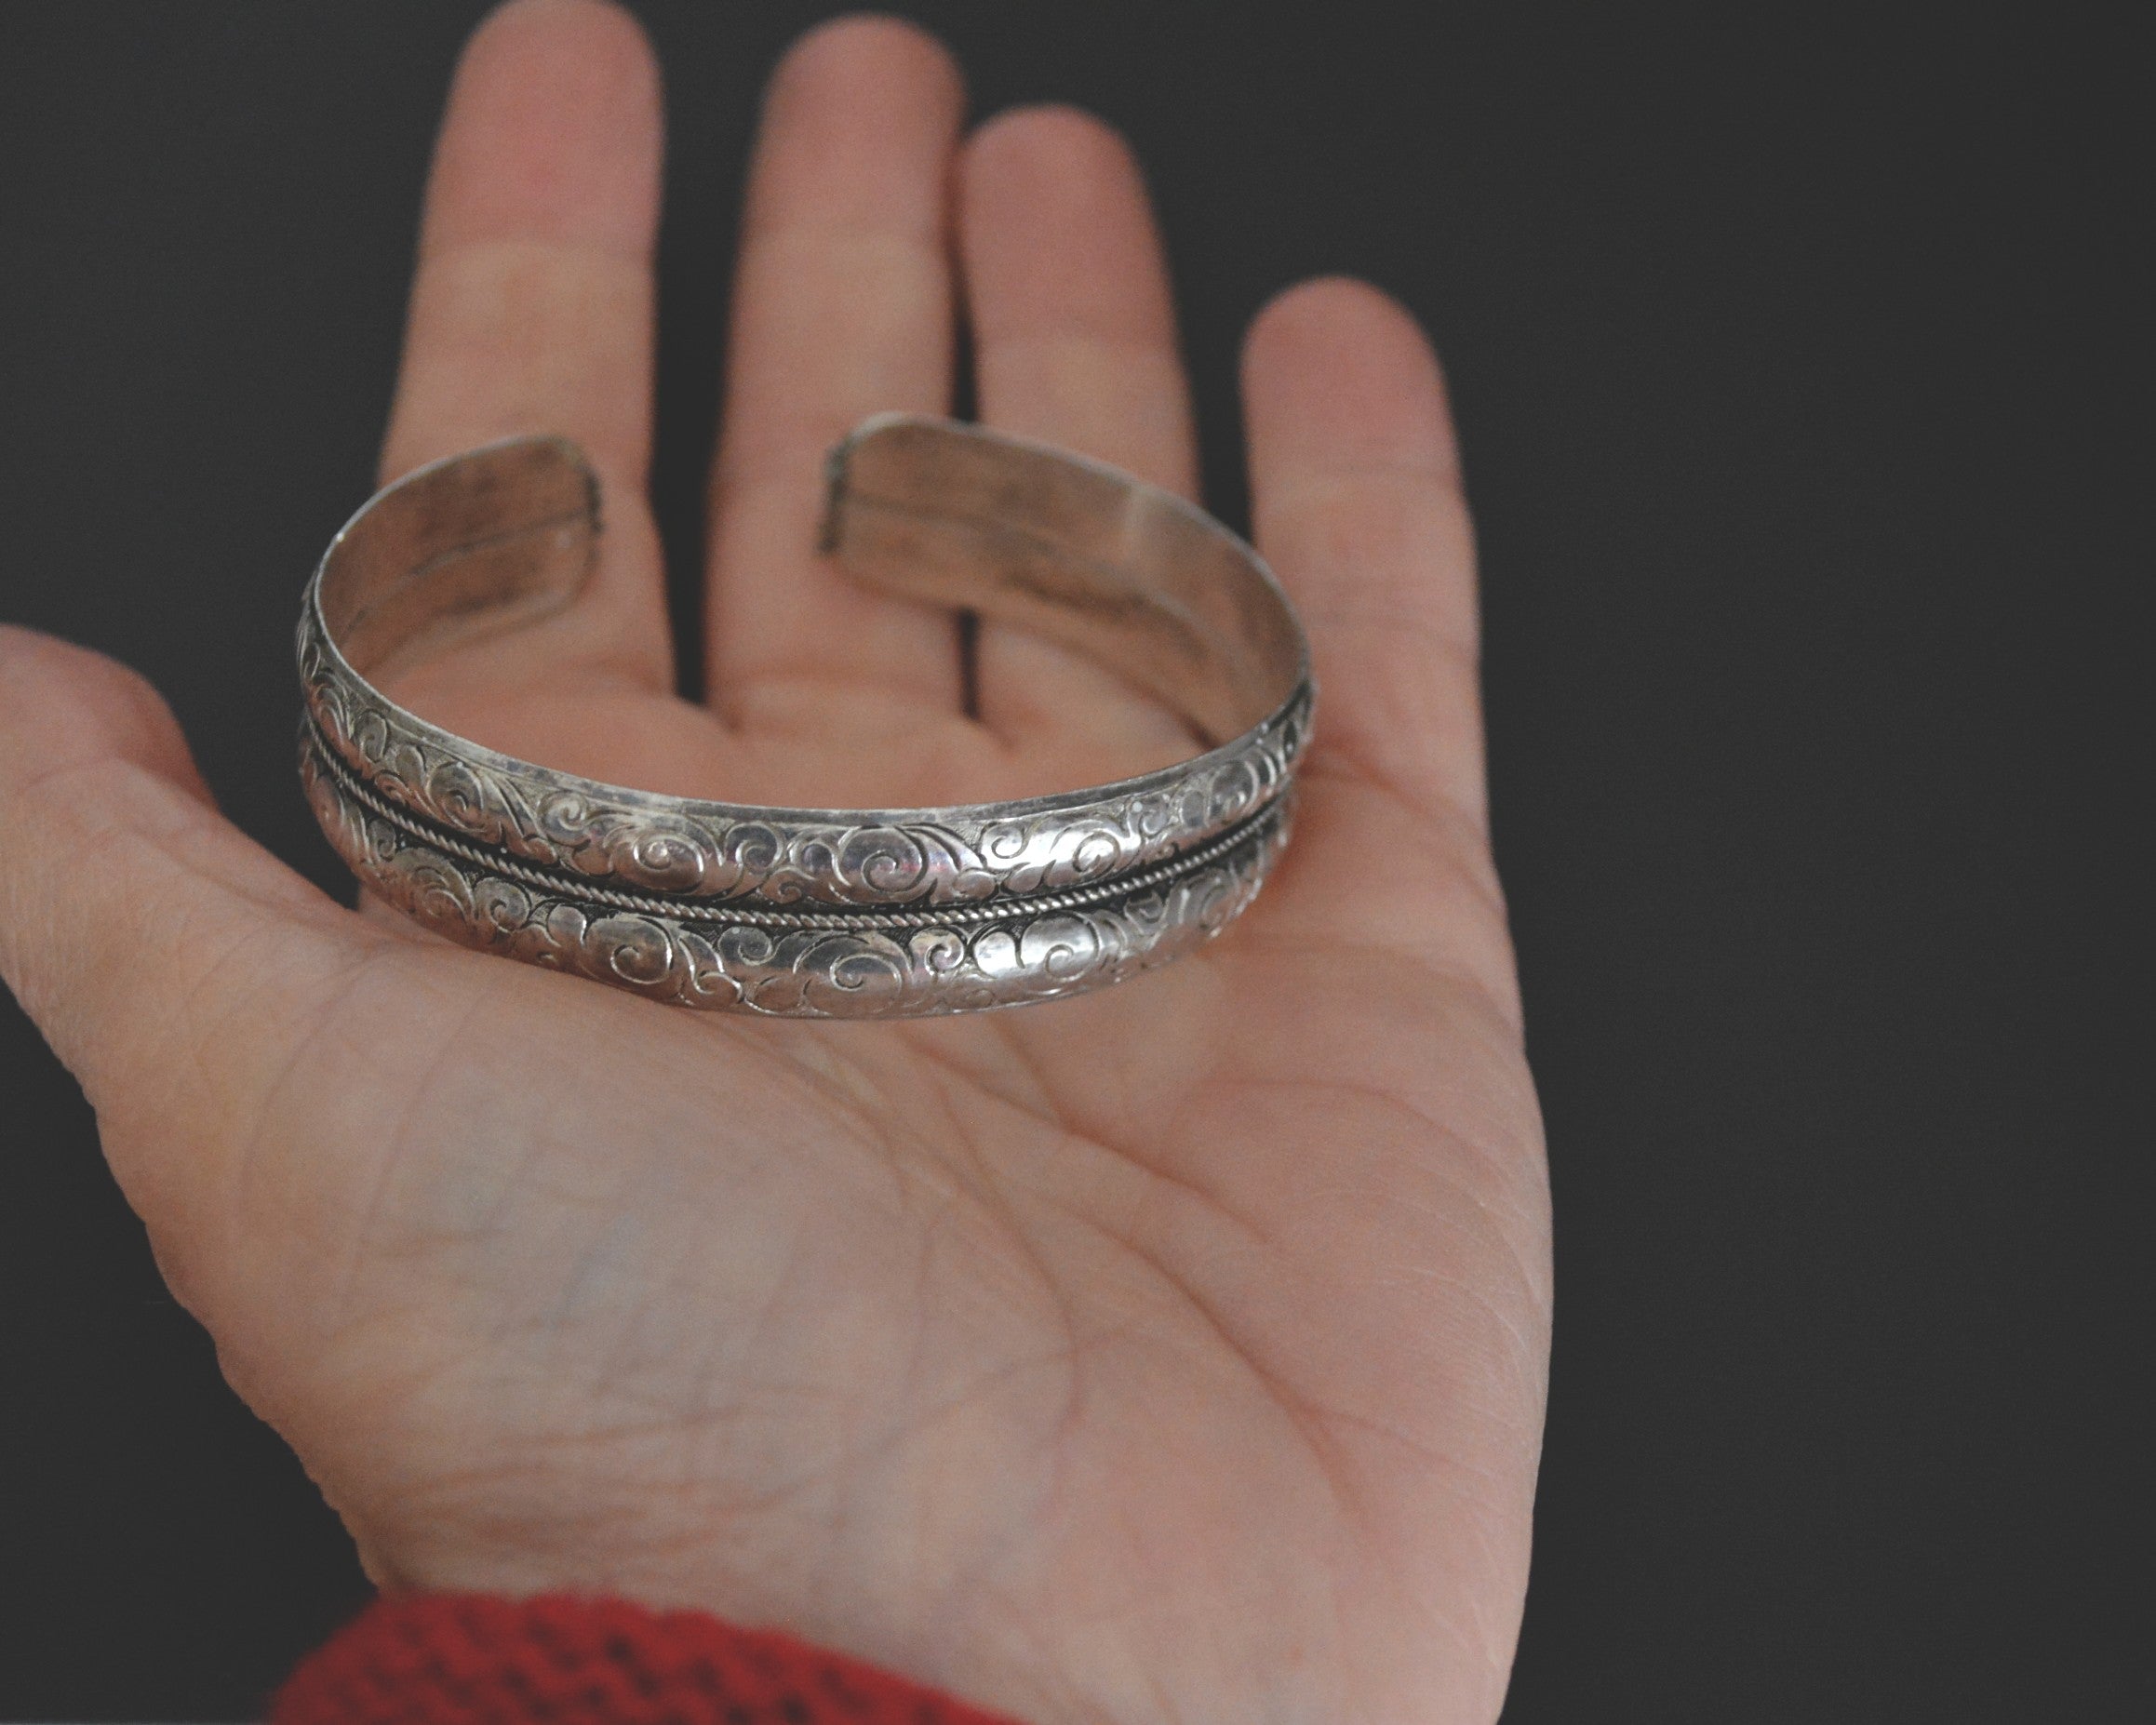 Nepali Silver Cuff Bracelet with Carvings